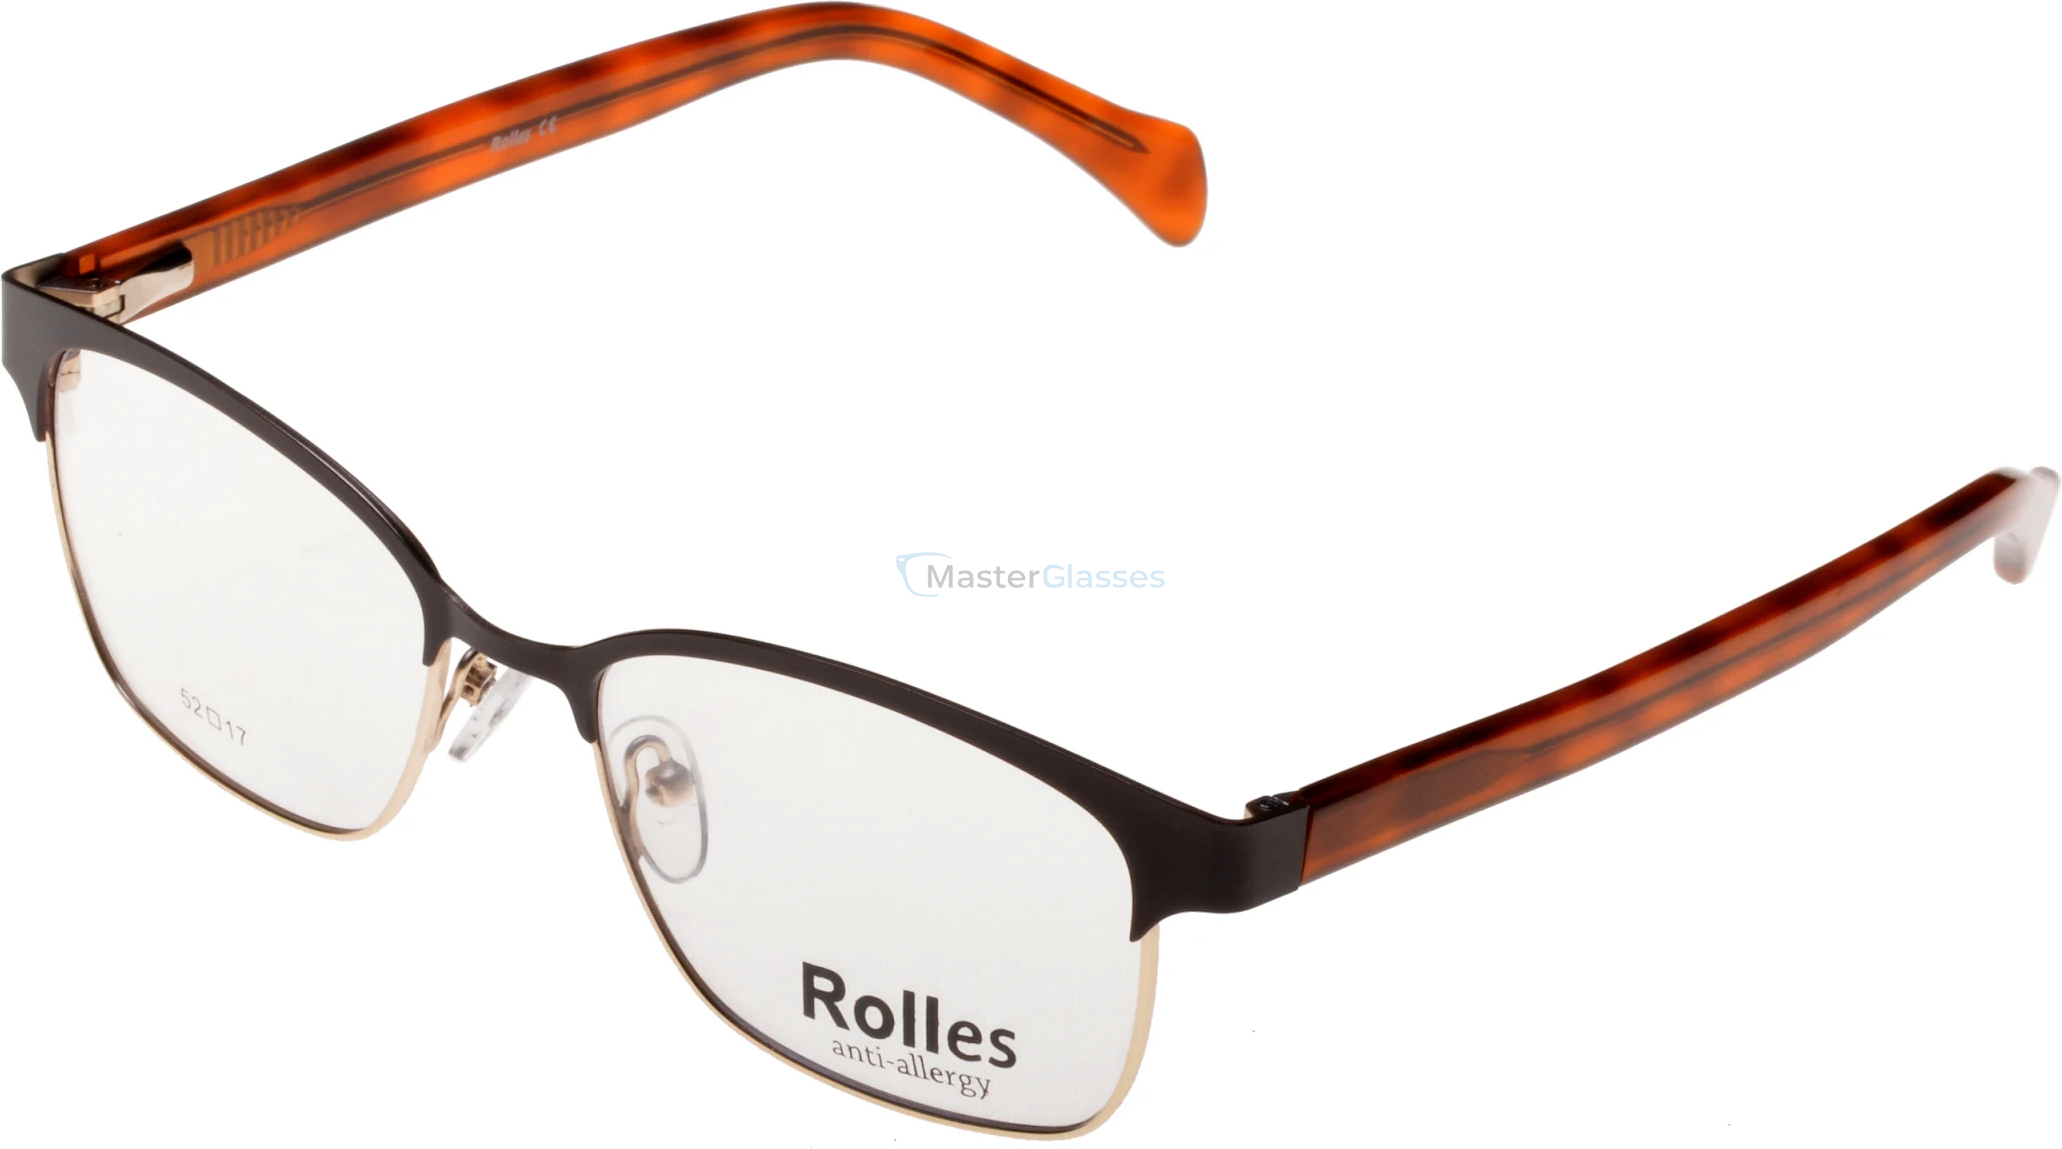  Rolles 463 01